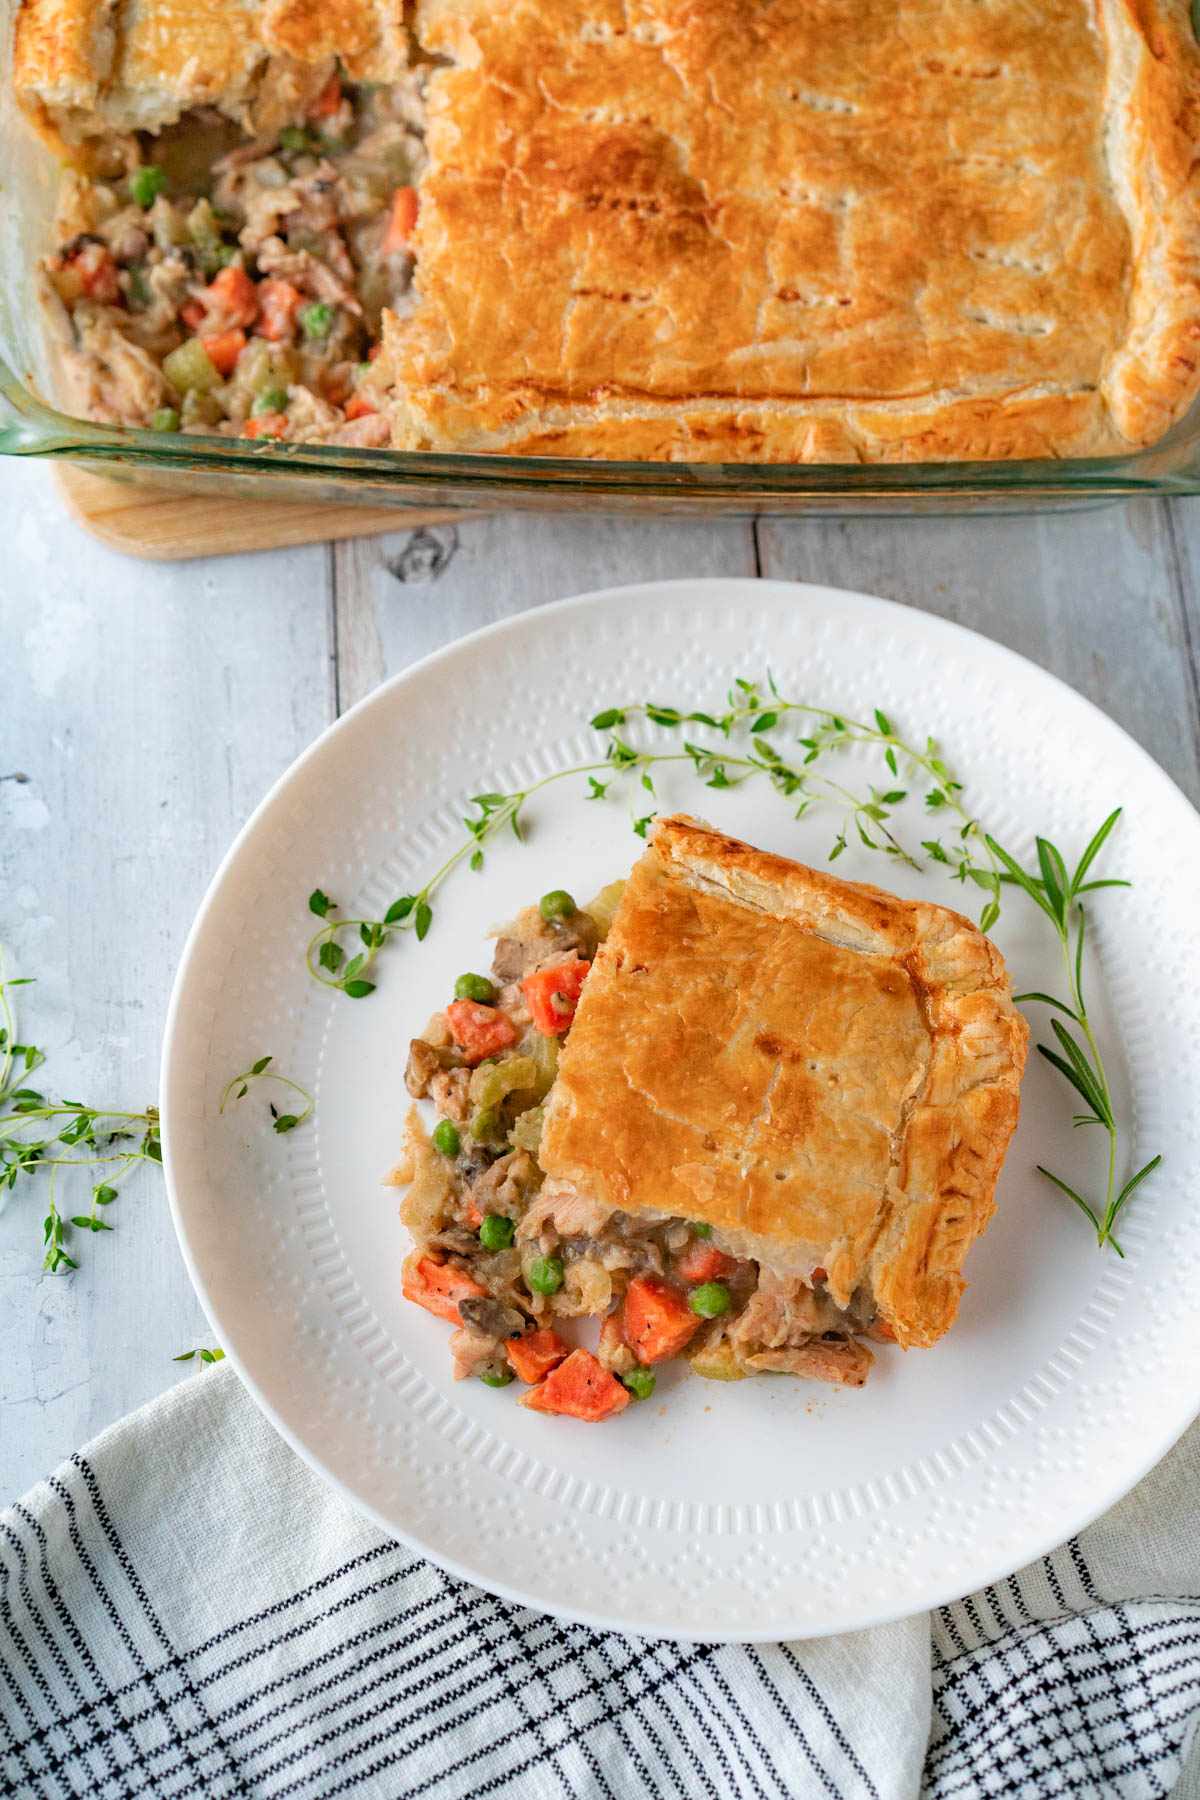 Top-down view of a rectangular slice of turkey pot pie on a small white plate, garnished with fresh thyme and rosemary. Above the plate is a baking dish of turkey pot pie with a slice missing. Below the plate is a white napkin with a black plaid pattern